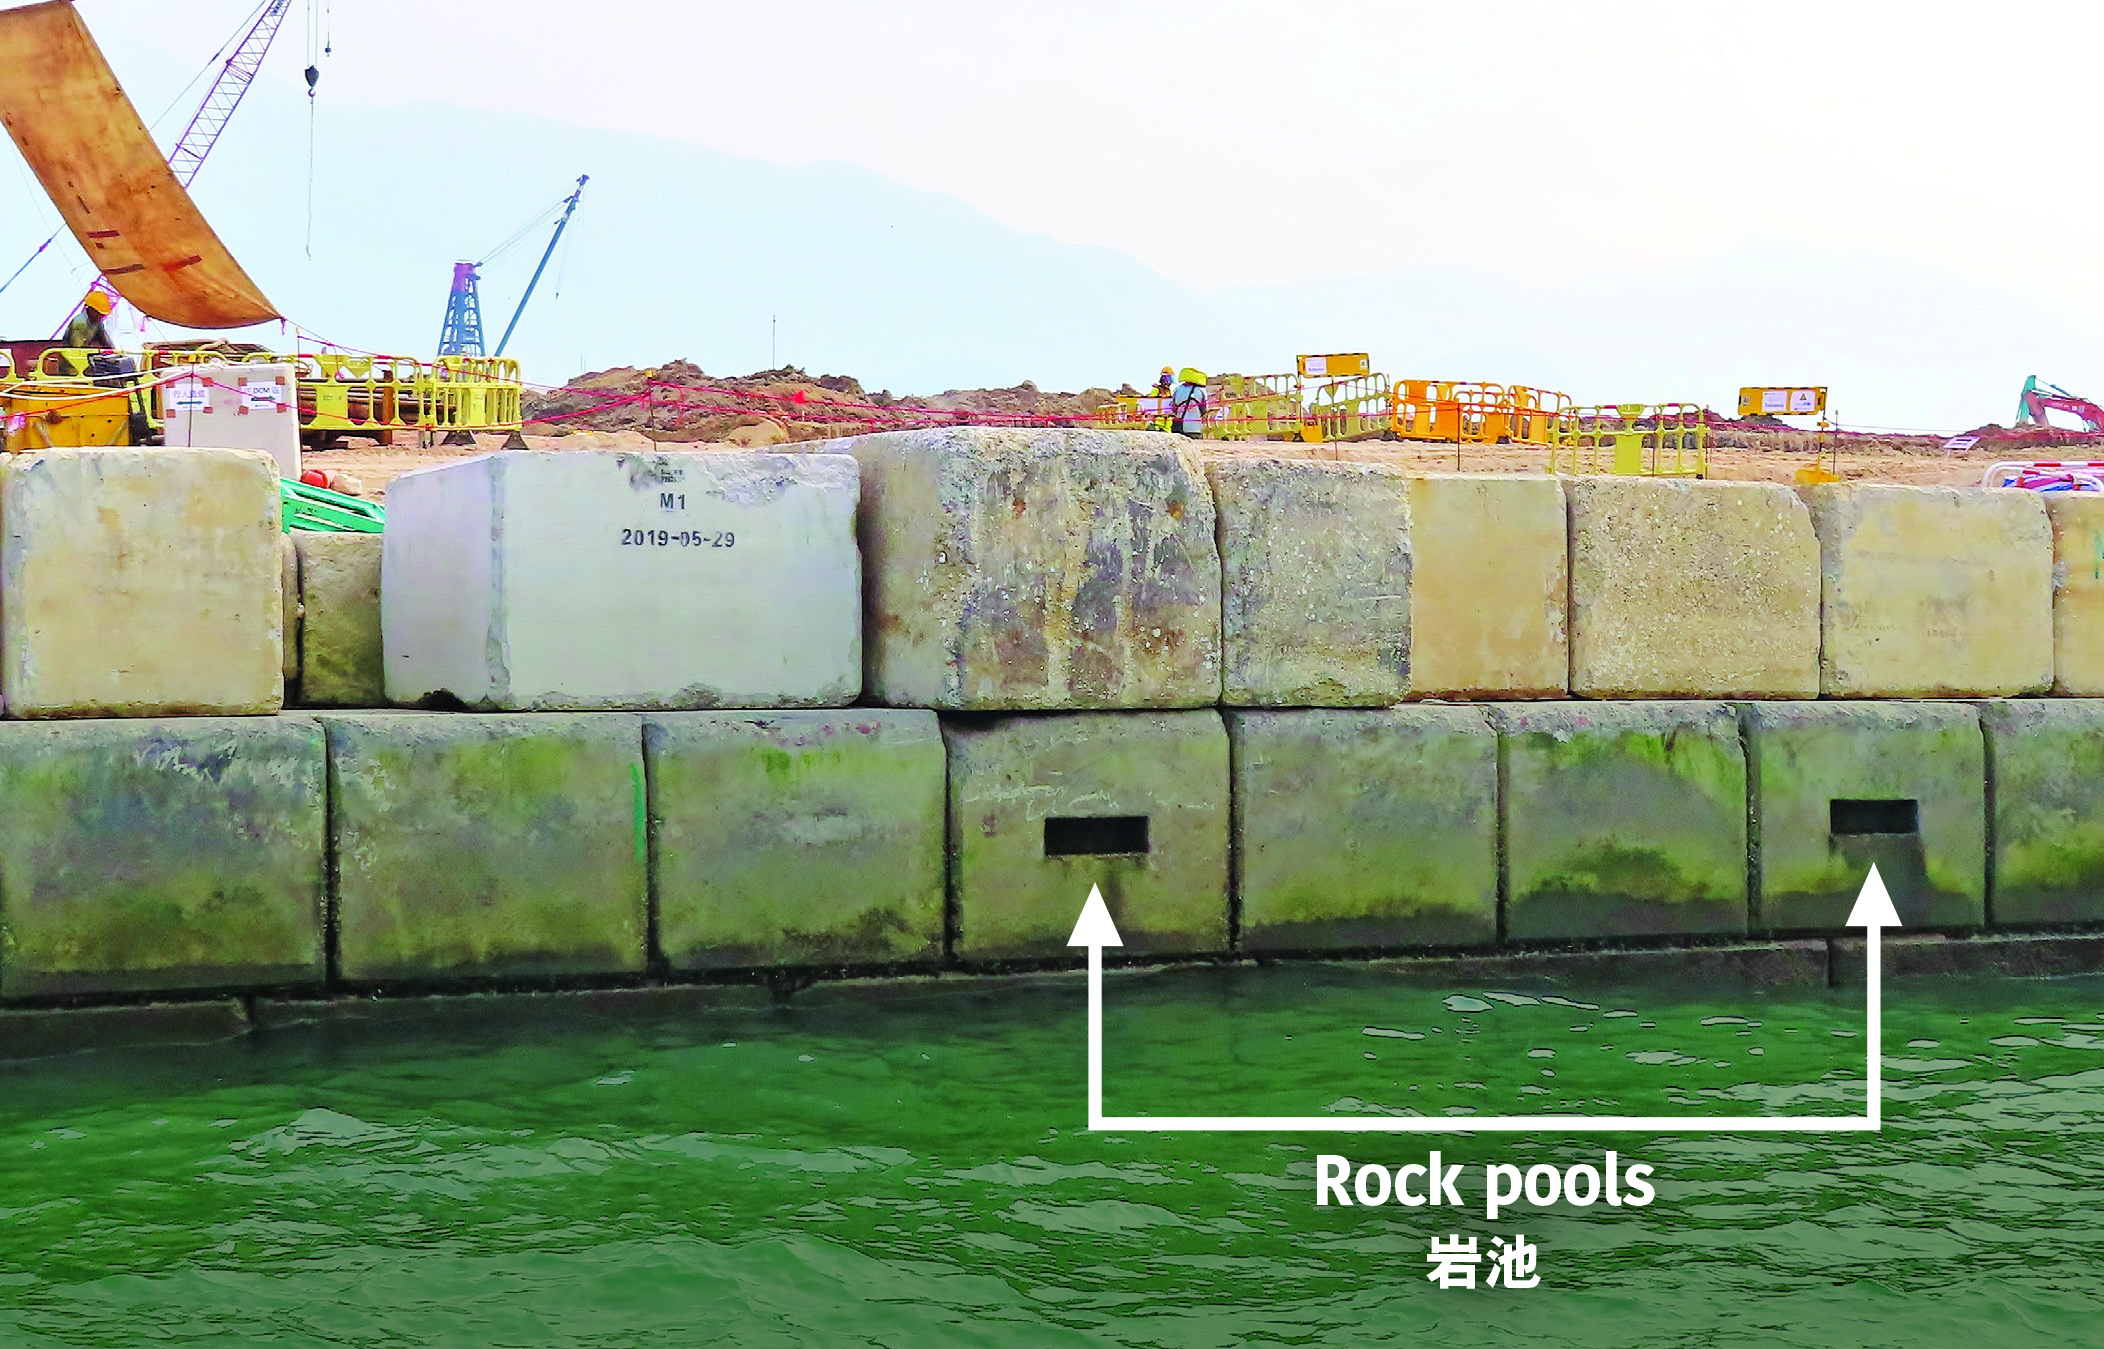 Scattered along the vertical seawalls are eco-enhanced concrete blocks that enrich marine biodiversity (top); and rock pools that provide shelter for organisms from currents and waves (bottom).